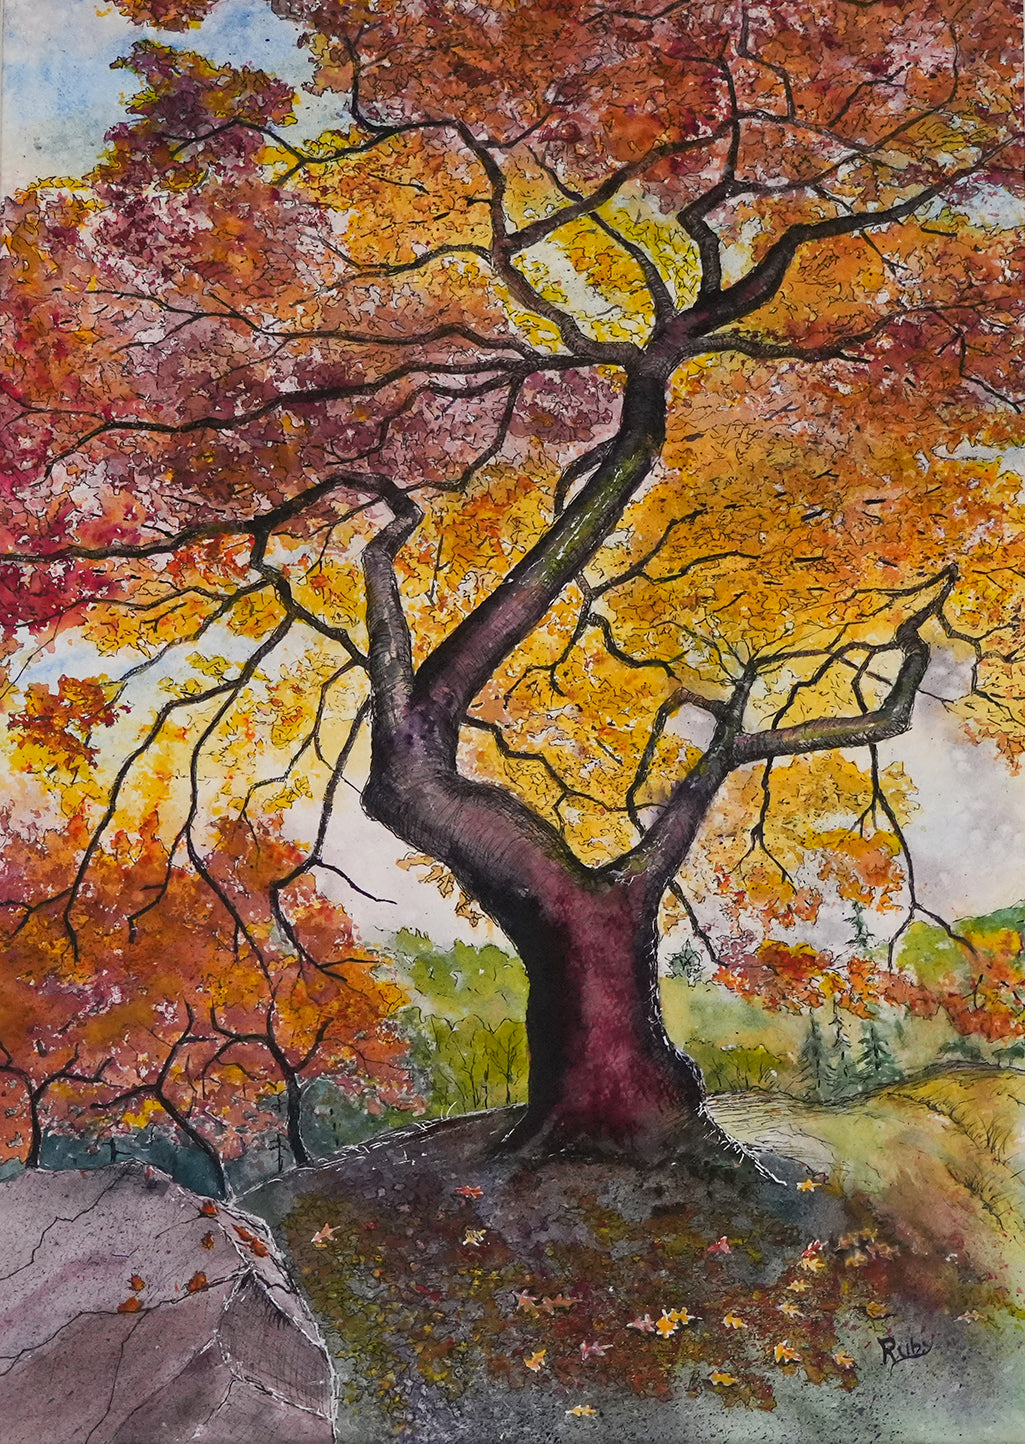 *Japanese Maple Majesty  (20 x 26 in. matted)